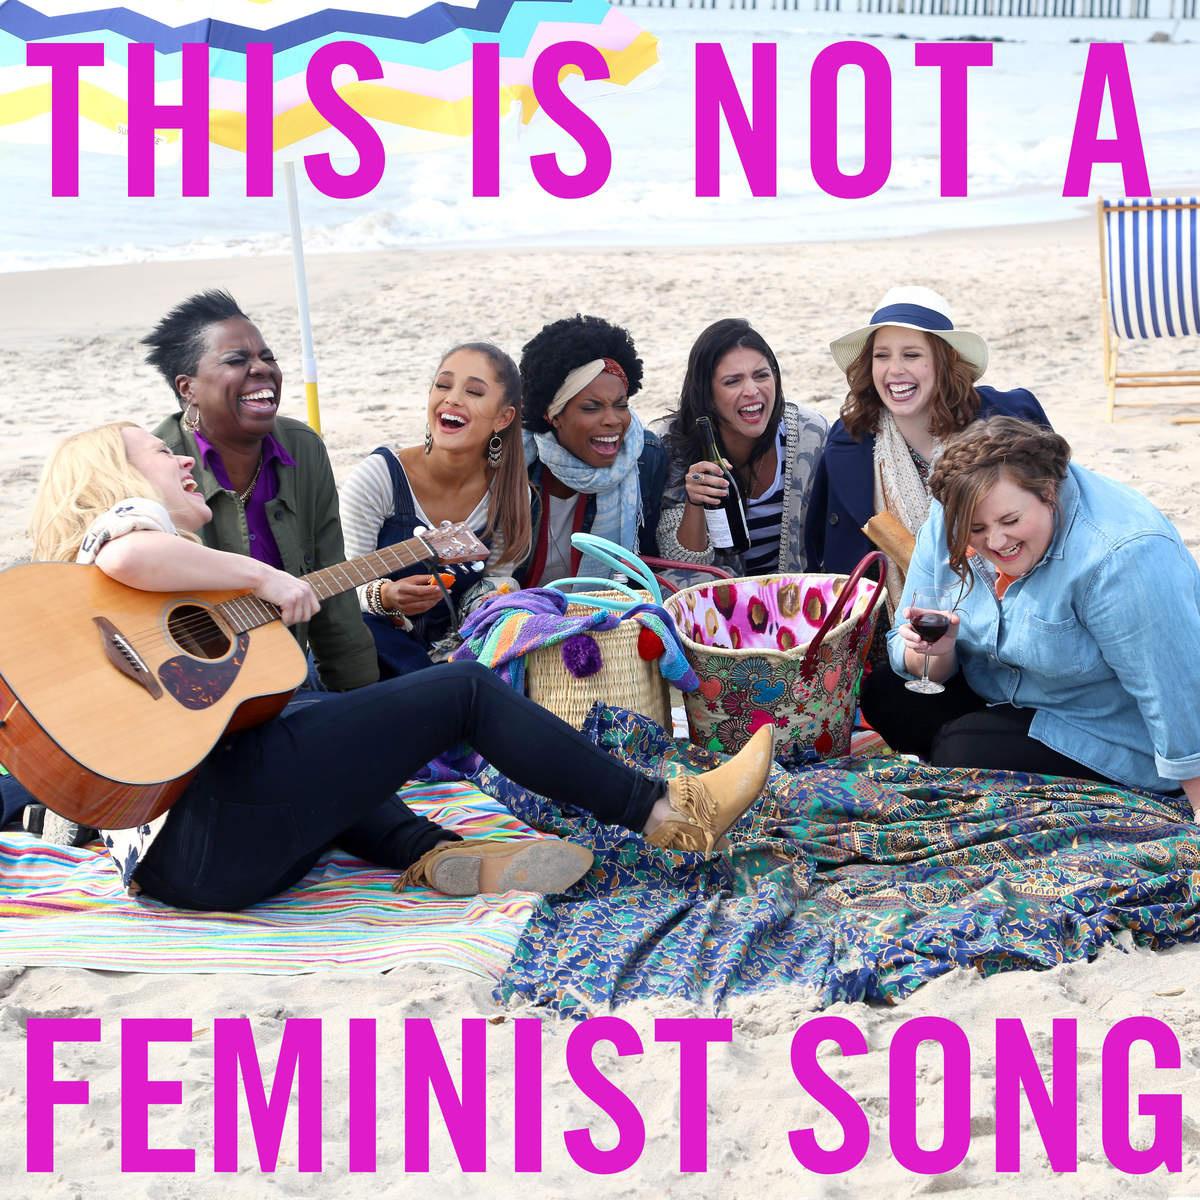 This Is Not a Feminist Song